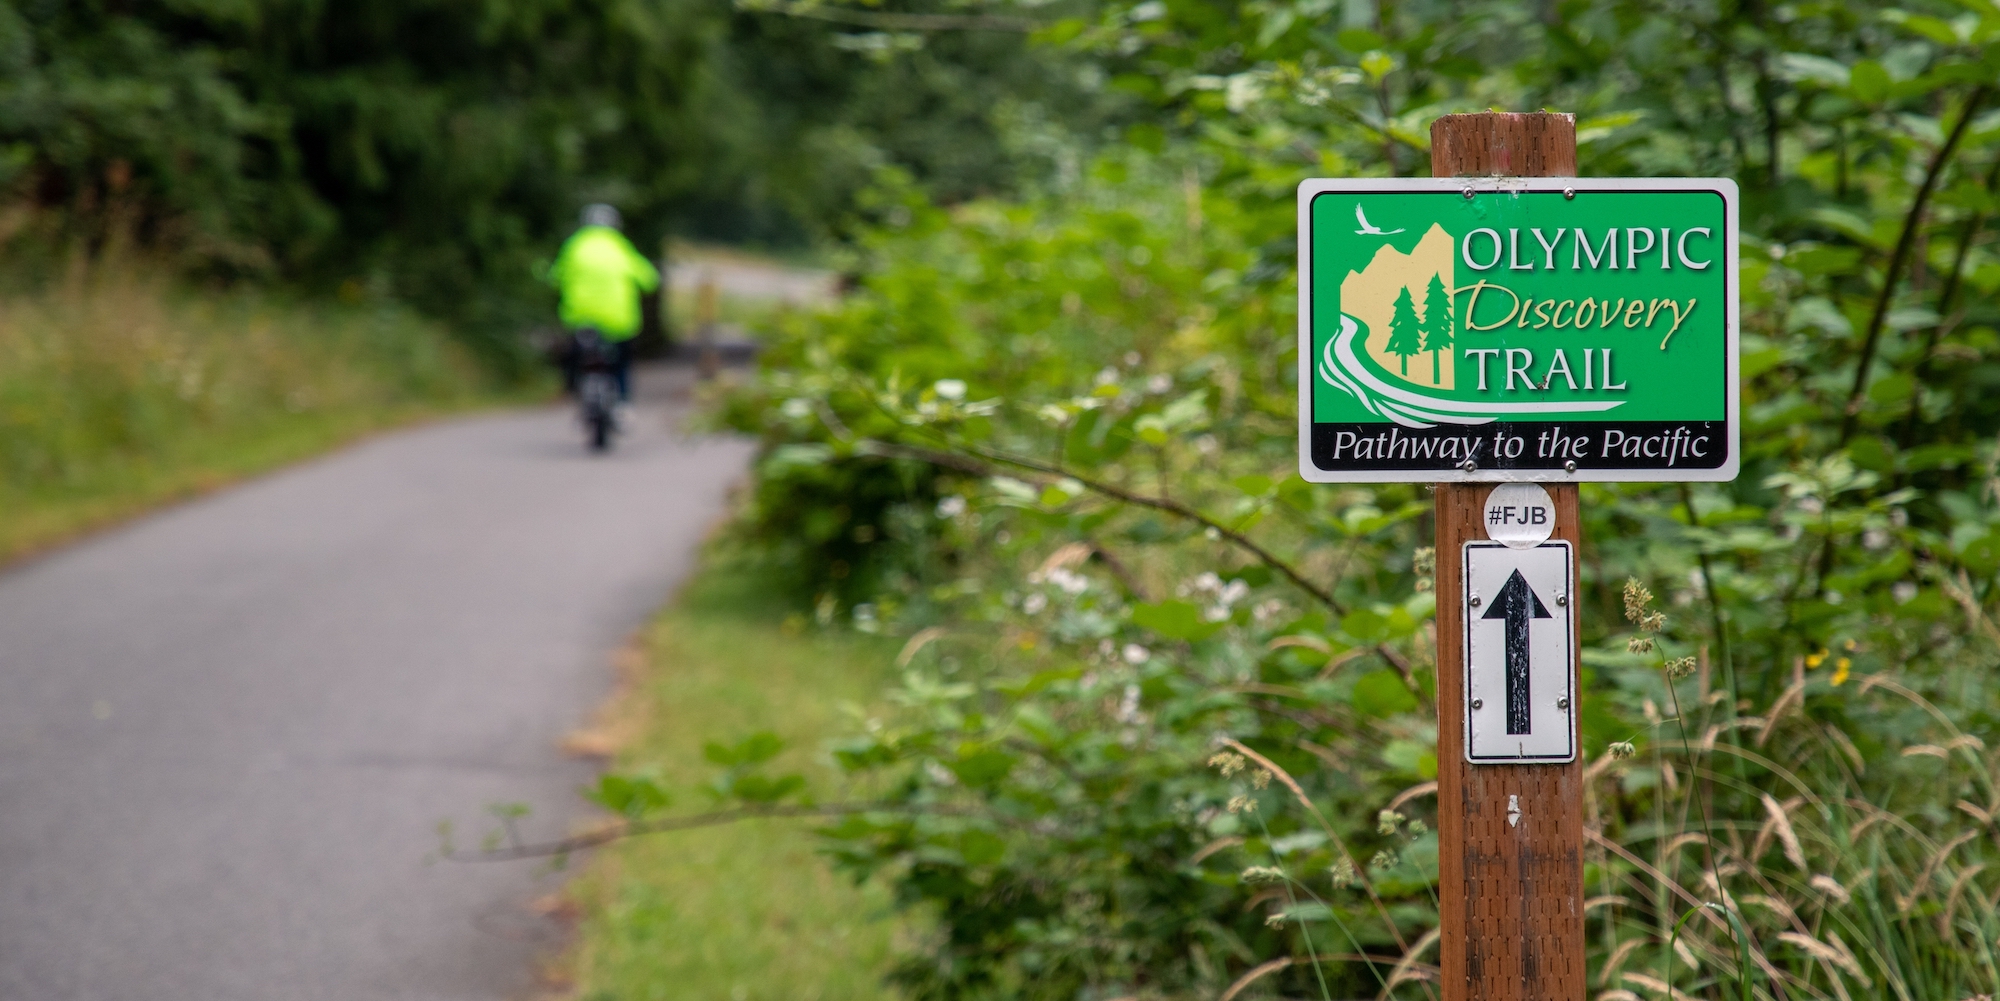 Sign post for the Olympic Discovery Trail using the rule of thirds with a person biking away on the trial in the blurred two thirds of the image